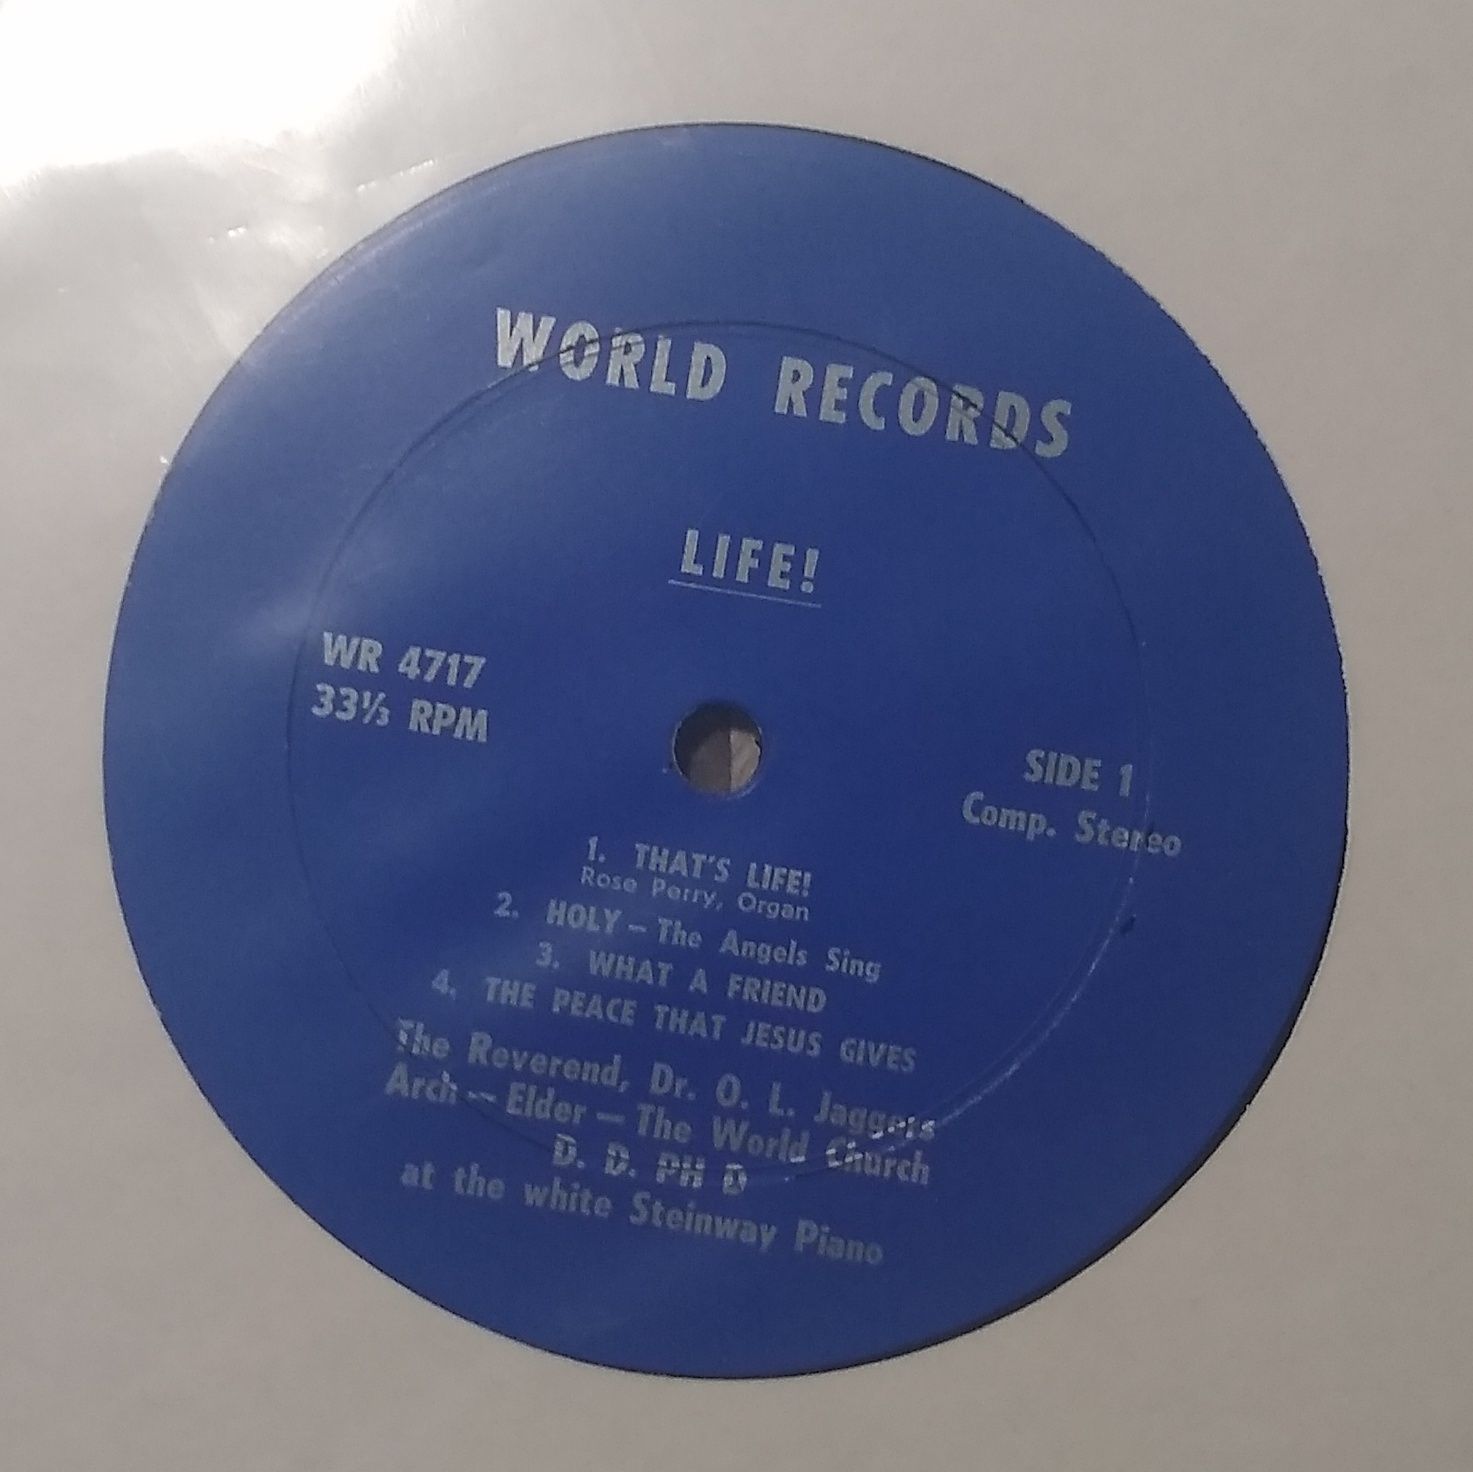 The center of the record, showing the title clearly as "Life!"